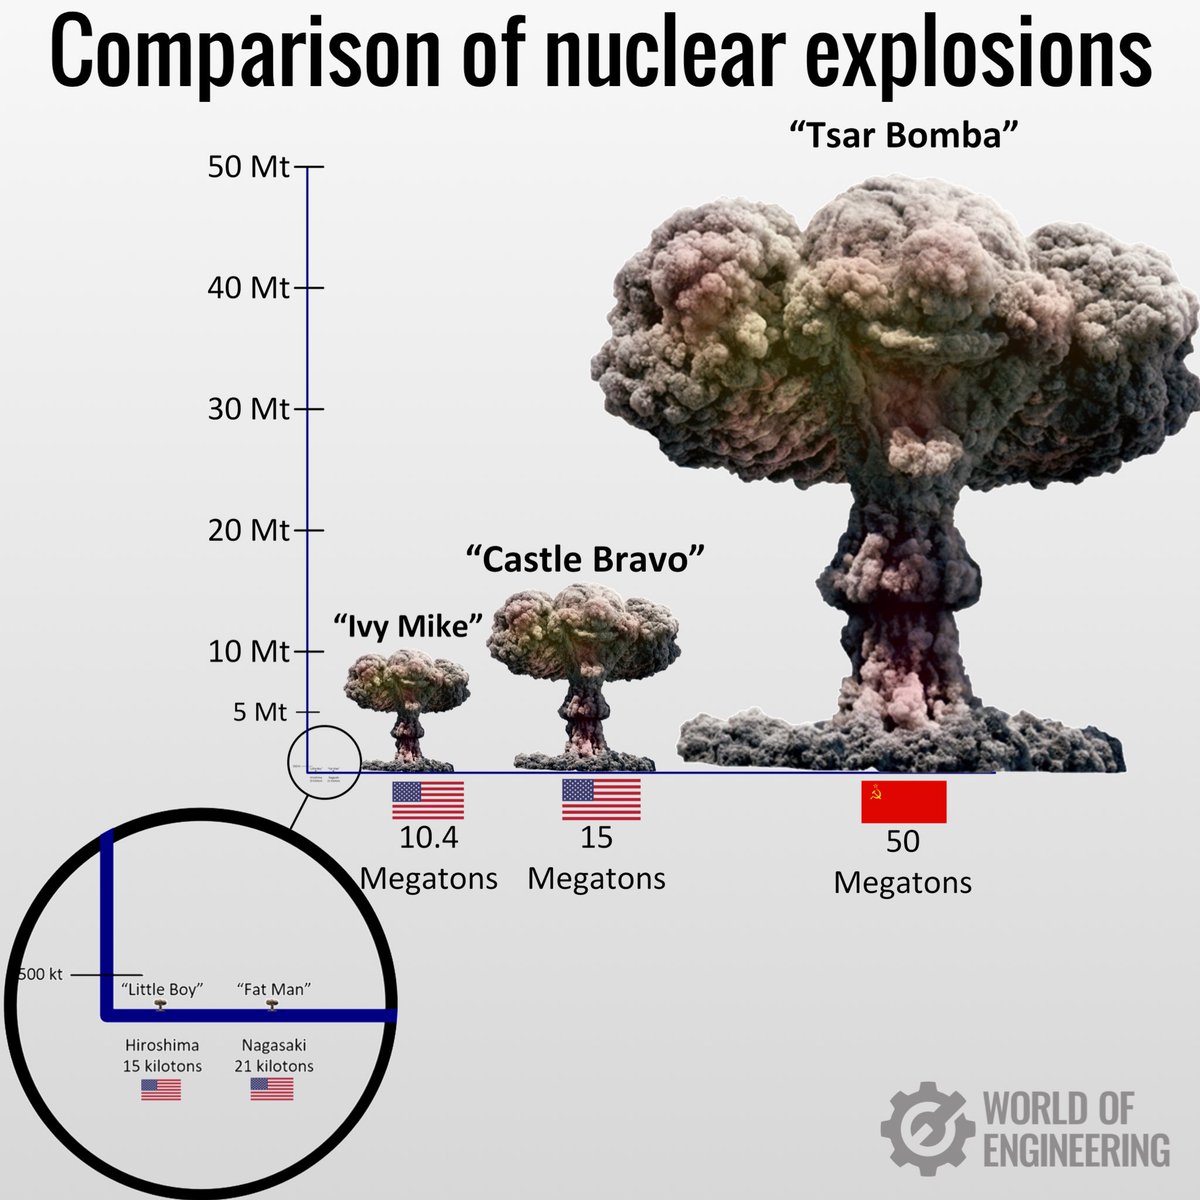 This infographic visually compares some nuclear explosions in history.